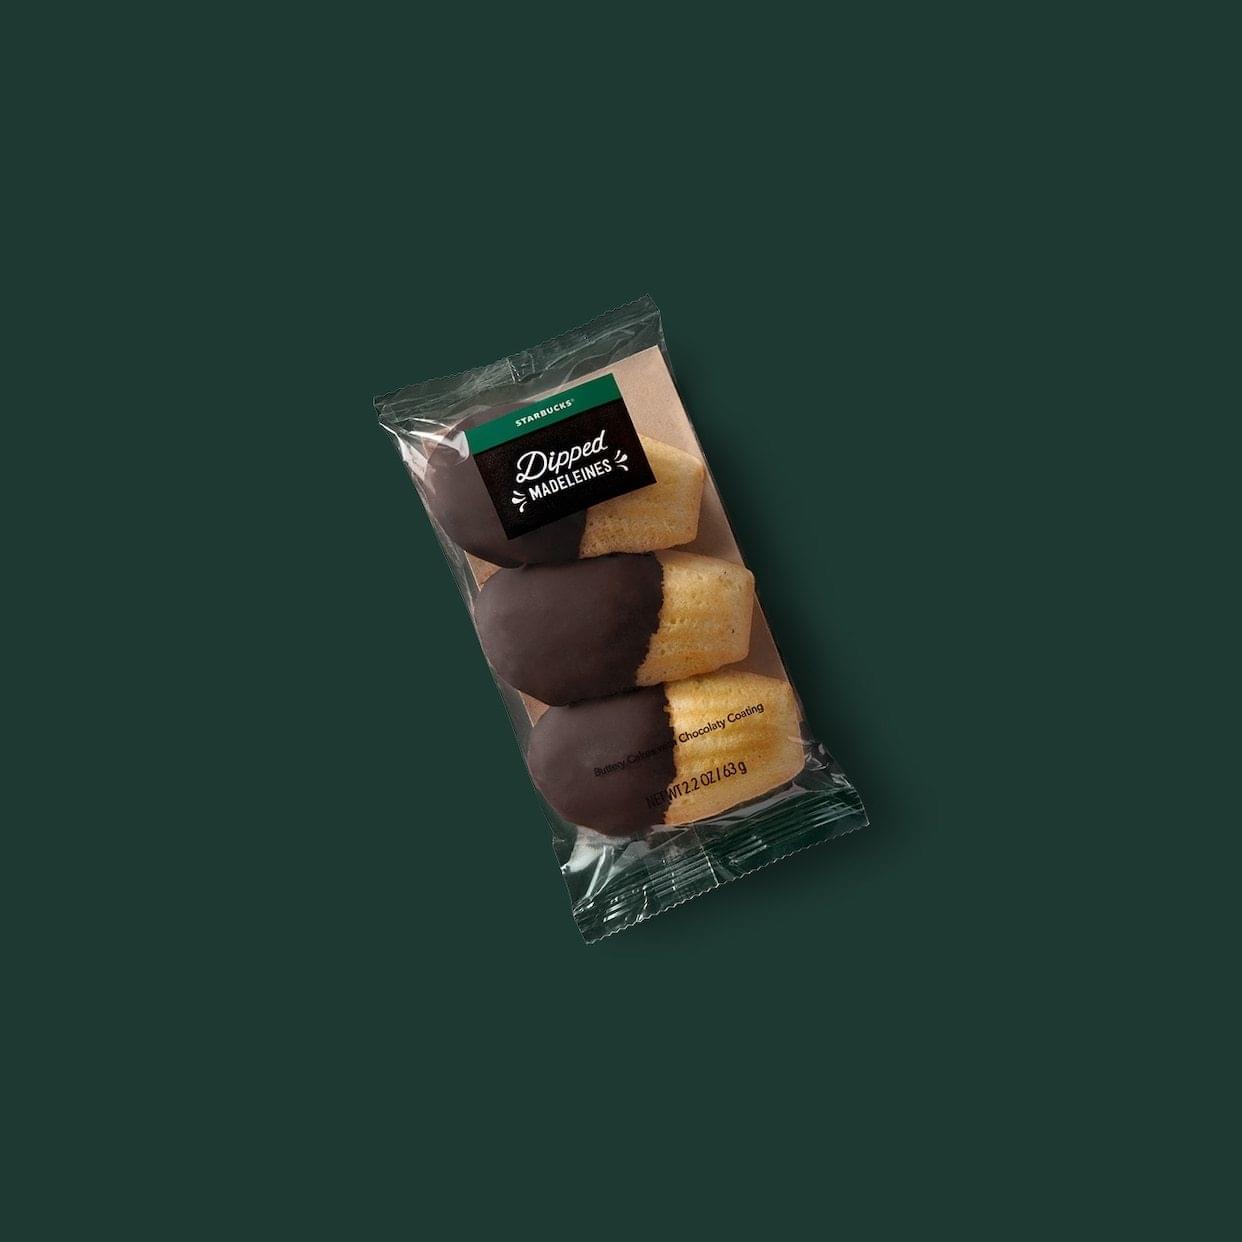 Starbucks Chocolate Dipped Madeleines Nutrition Facts